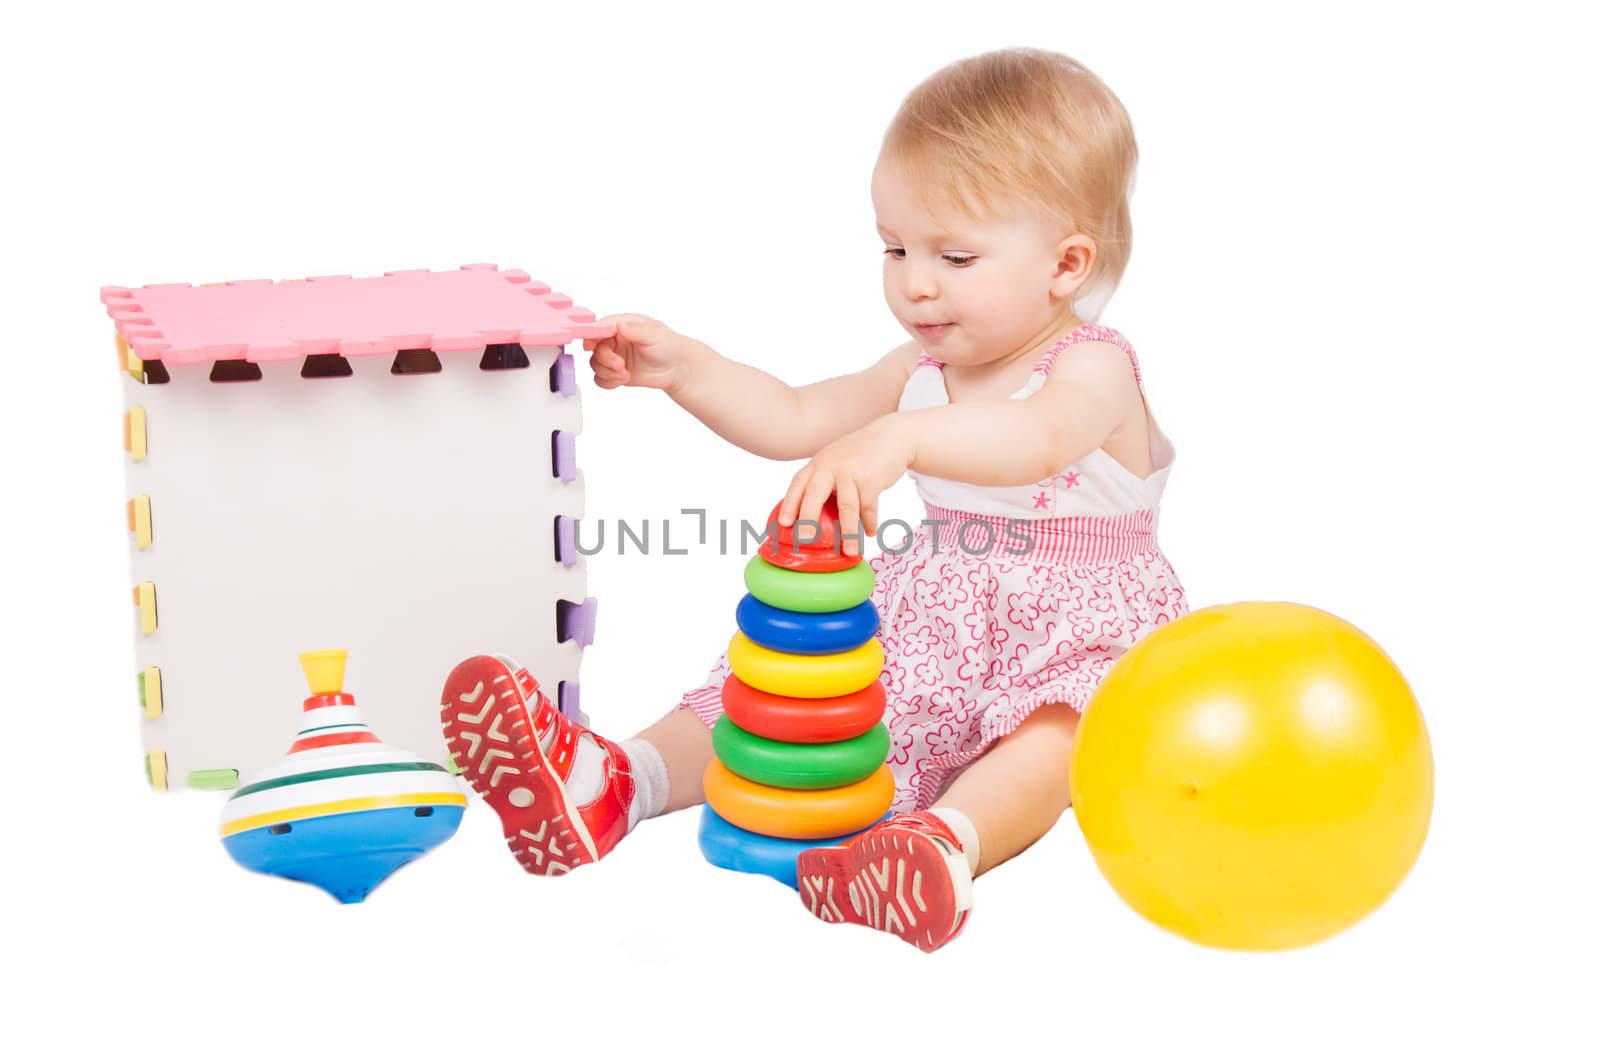 Baby girl playing toys over white